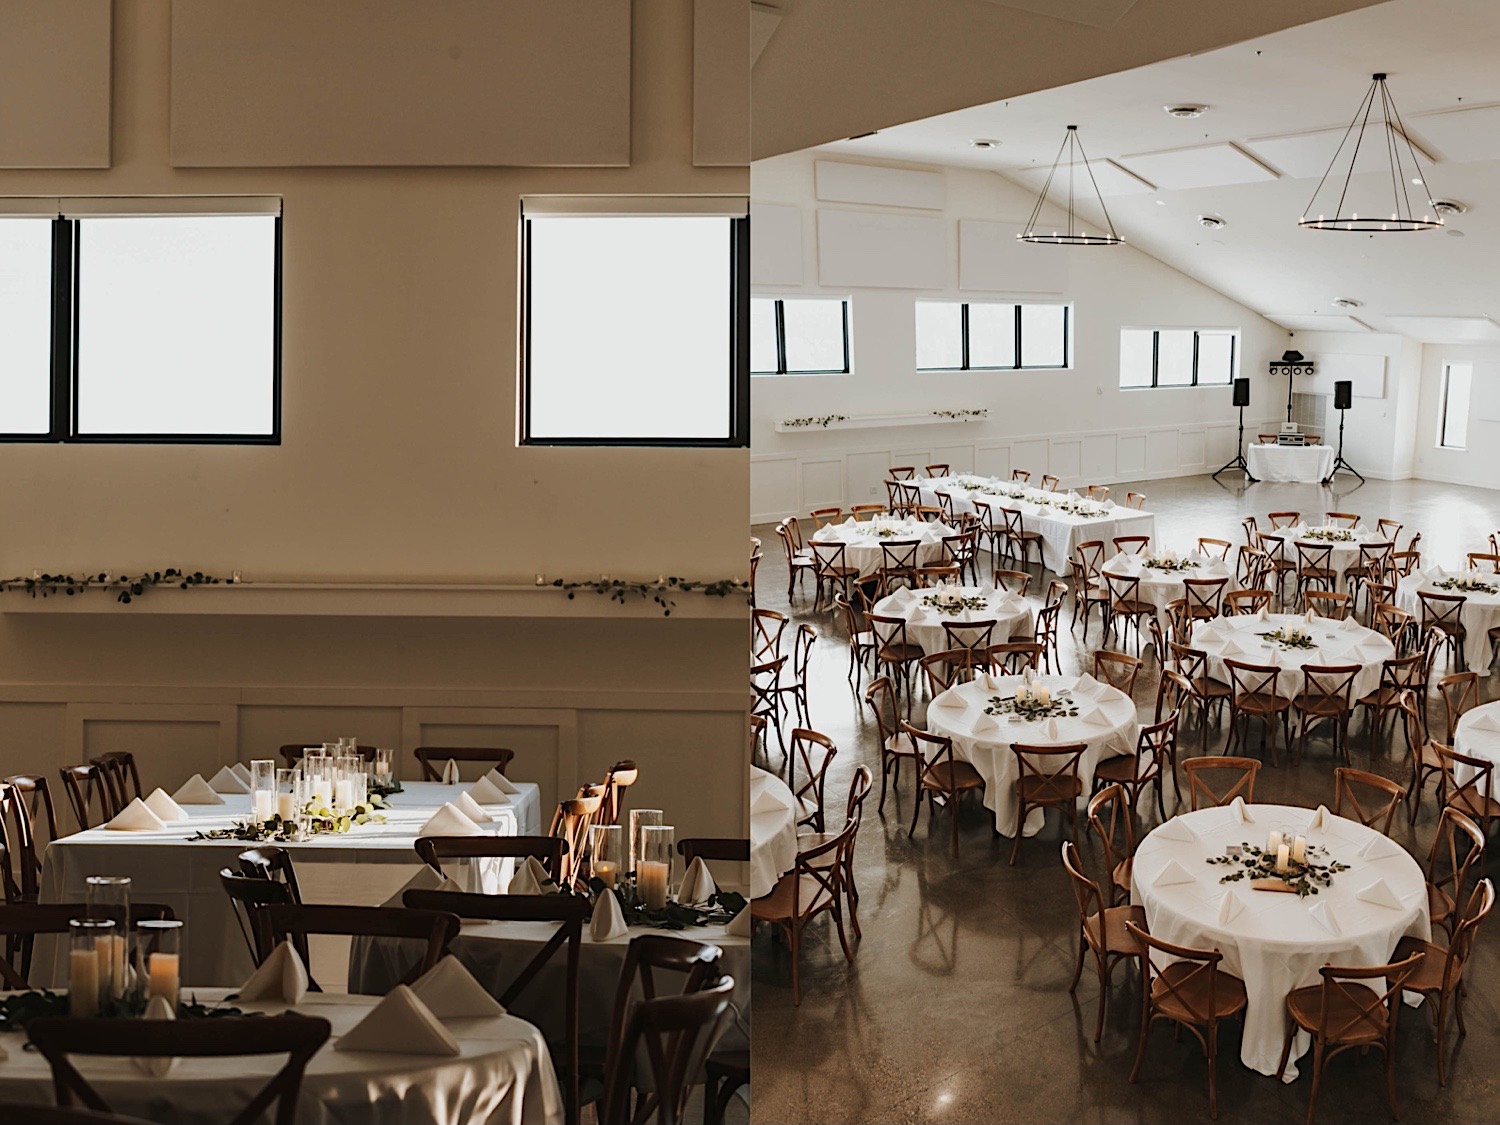 2 photos side by side of an indoor space at Woodhaven Weddings + Events, both photos are of the reception space from different angles showing off the space fully decorated